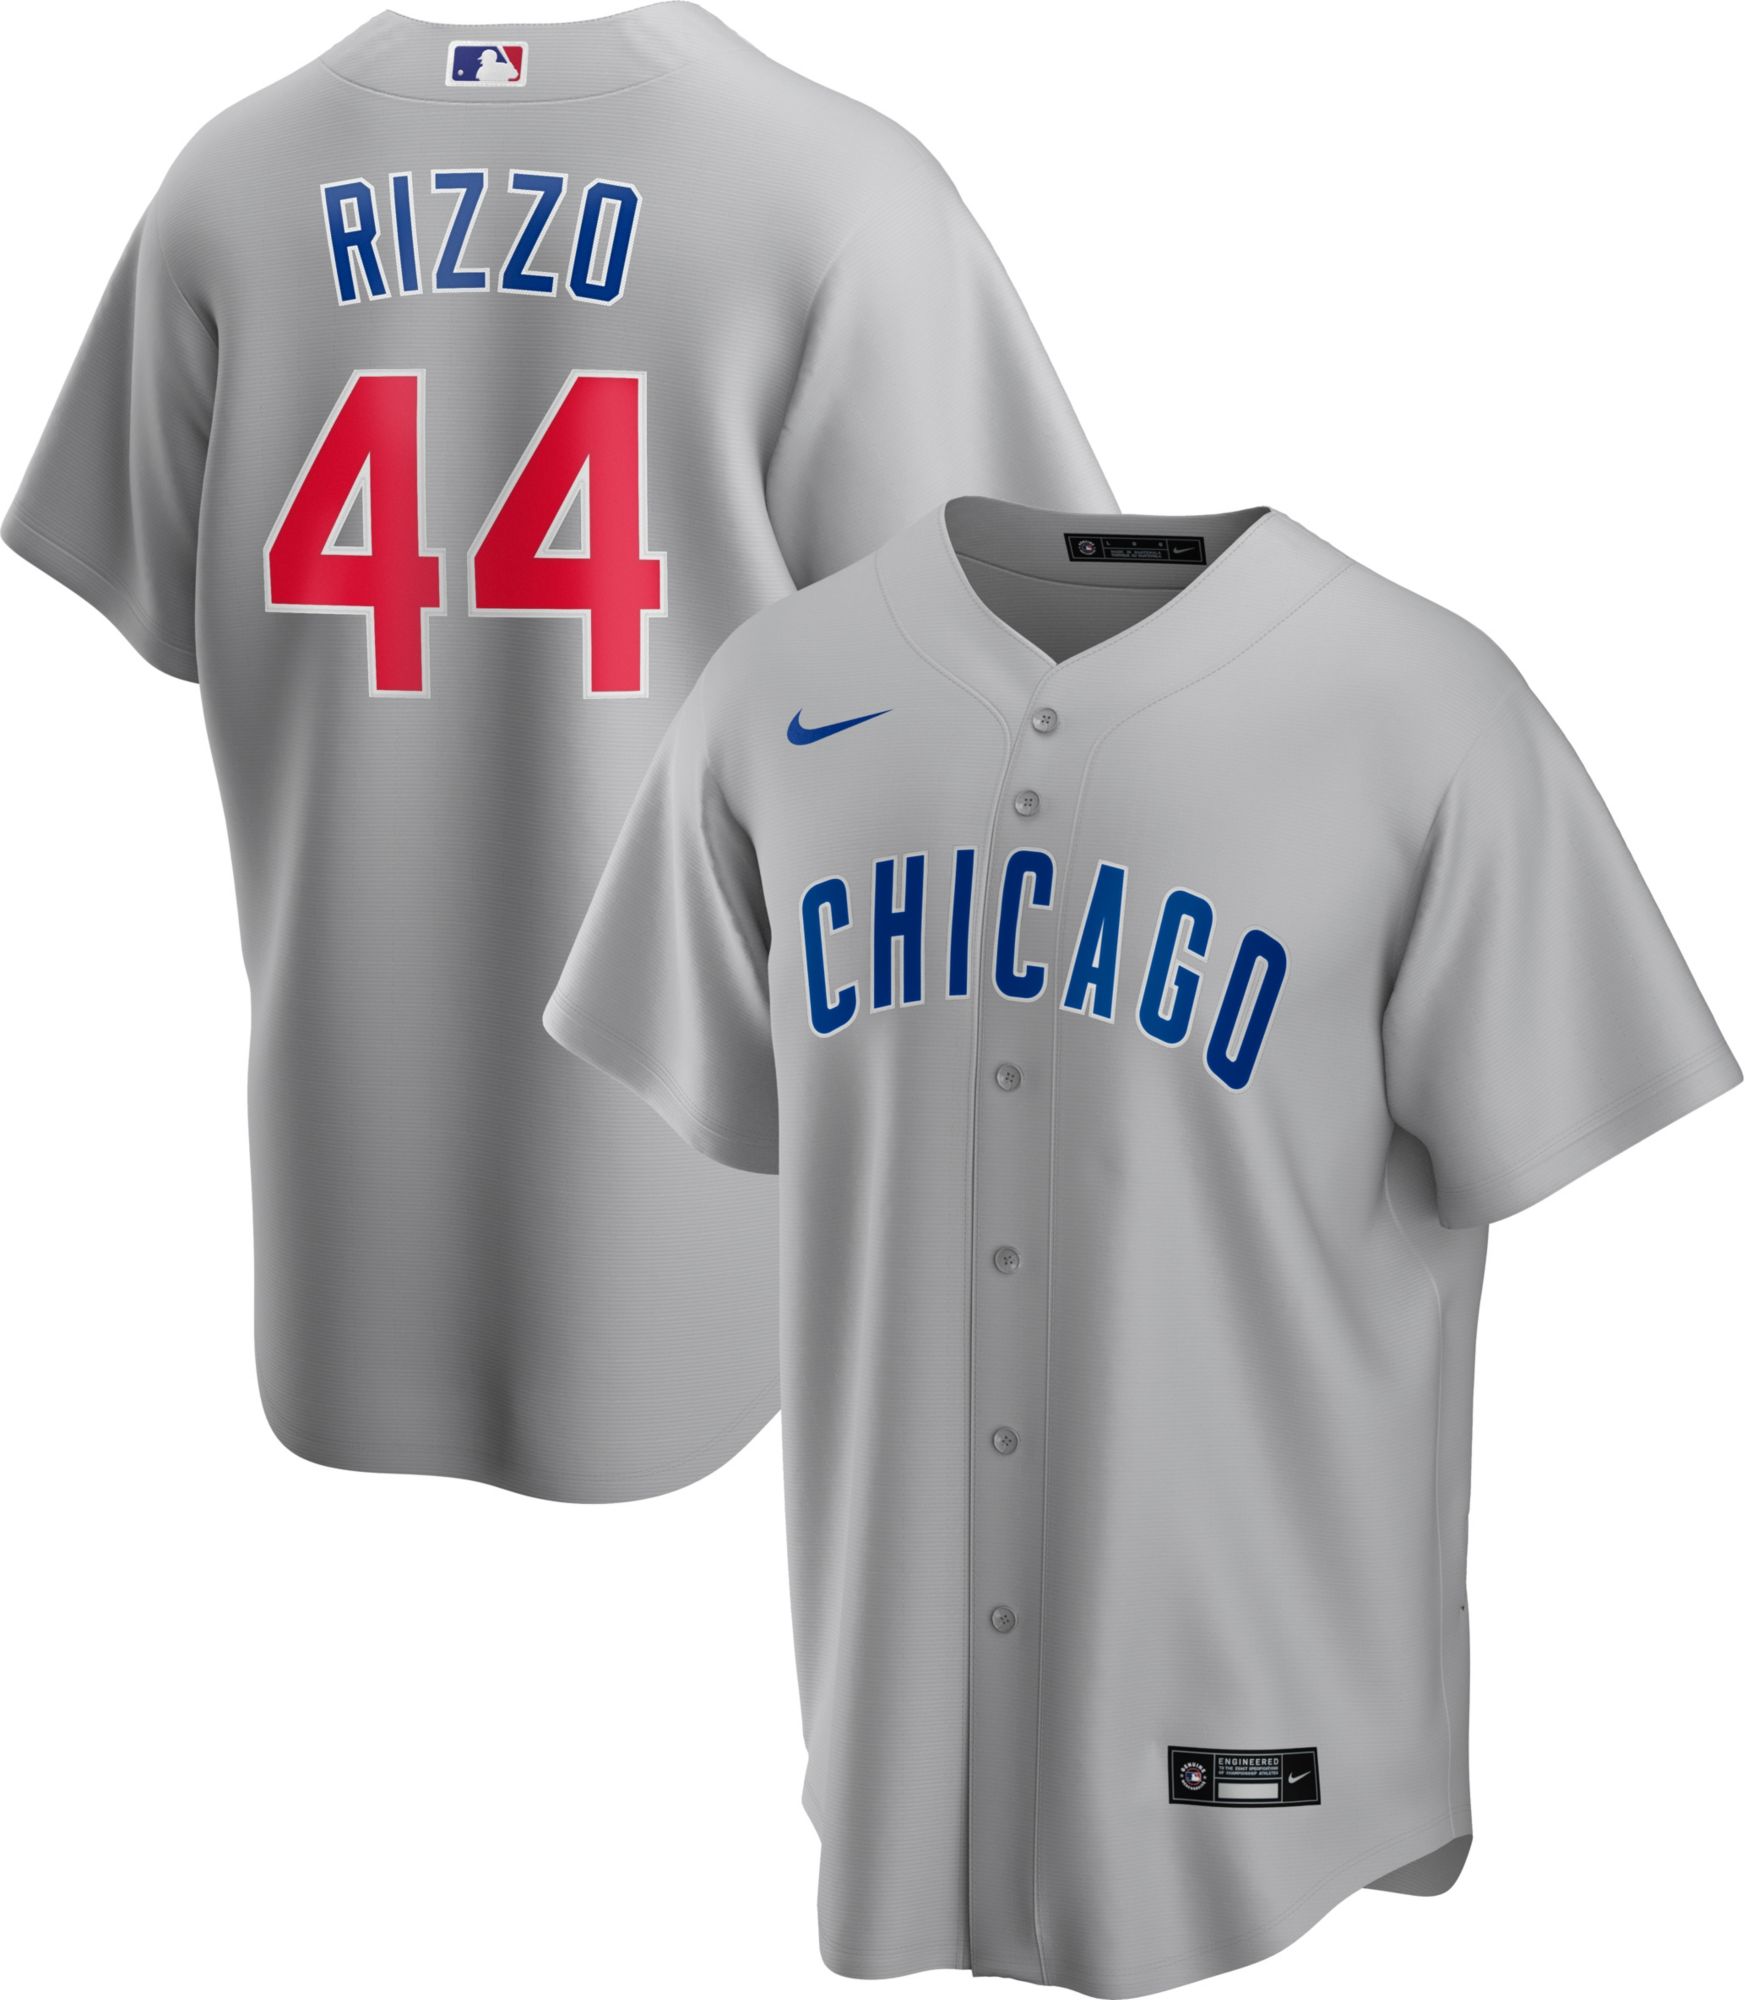 grey rizzo jersey